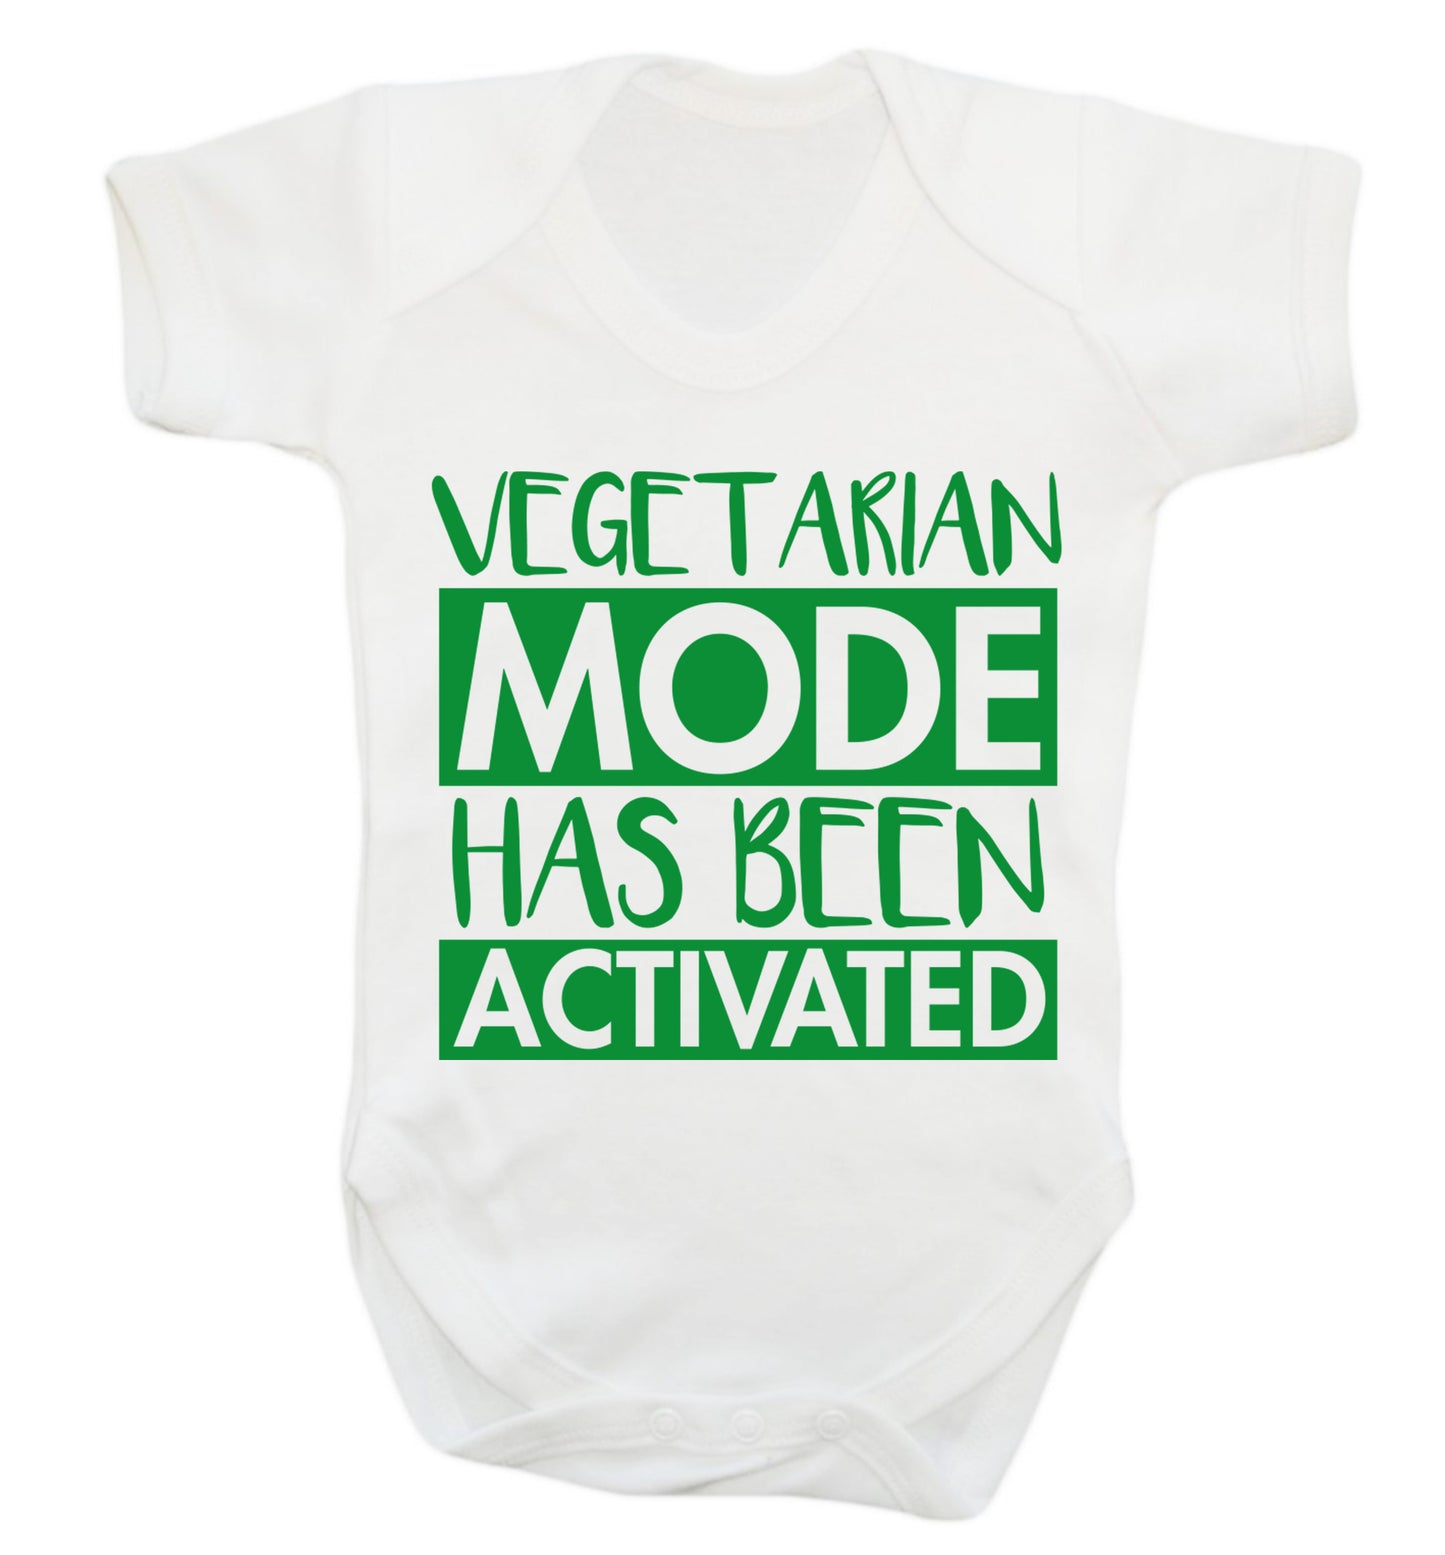 Vegetarian mode activated Baby Vest white 18-24 months